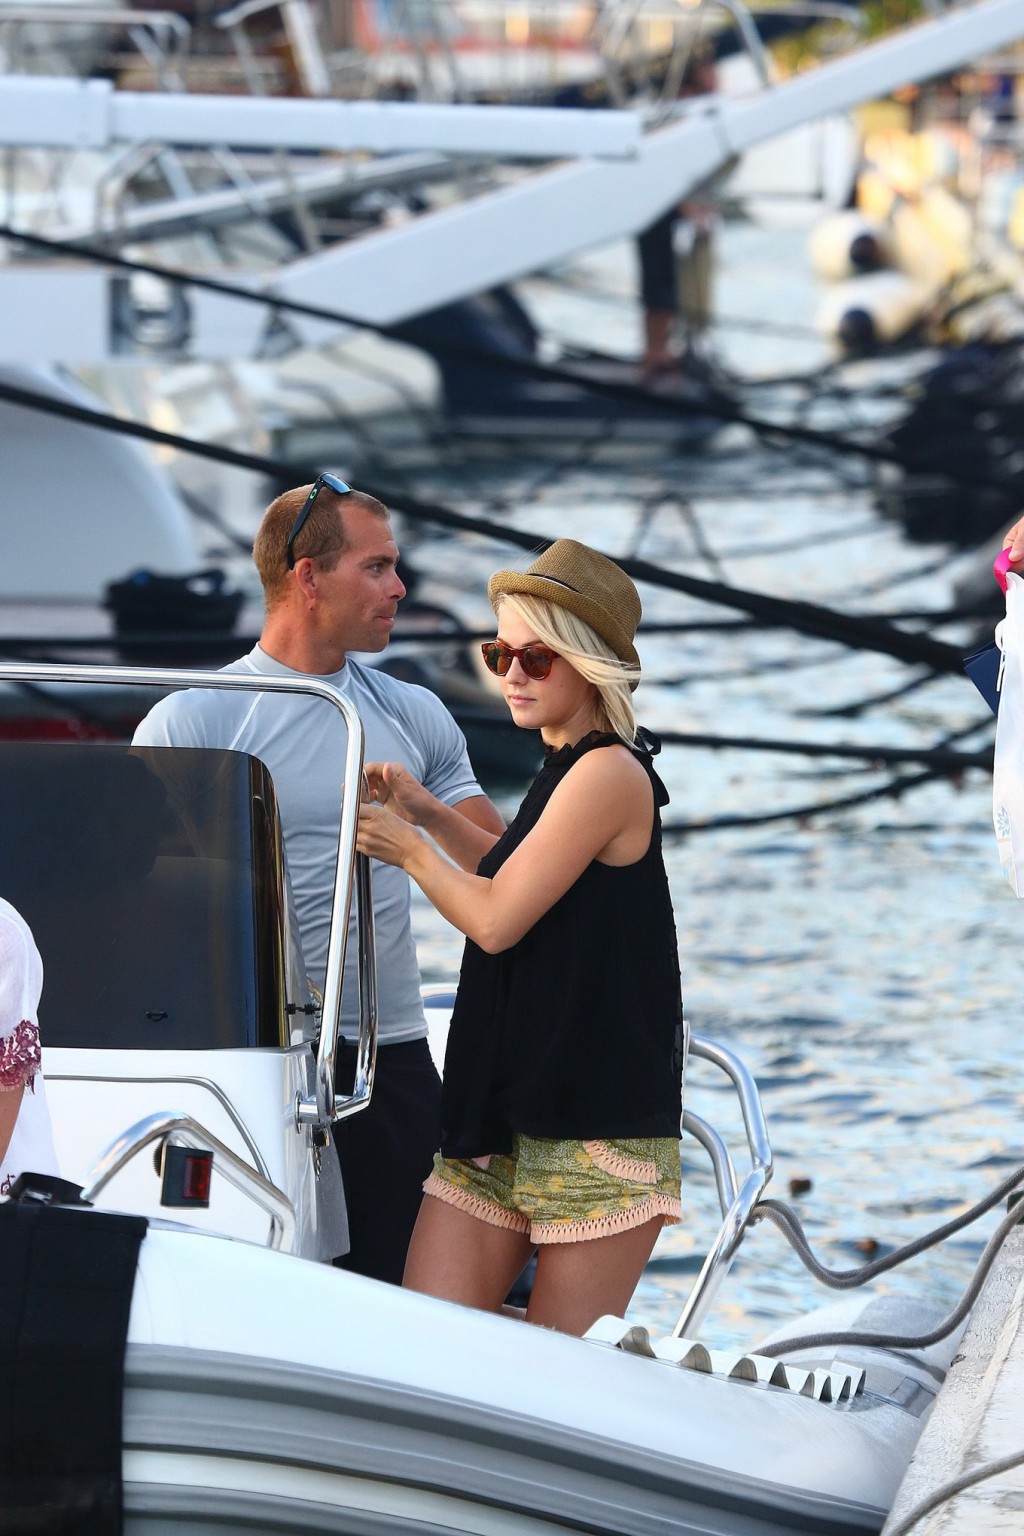 Julianne Hough wearing skimpy shorts  overall top while on vacation in St Barts #75244592